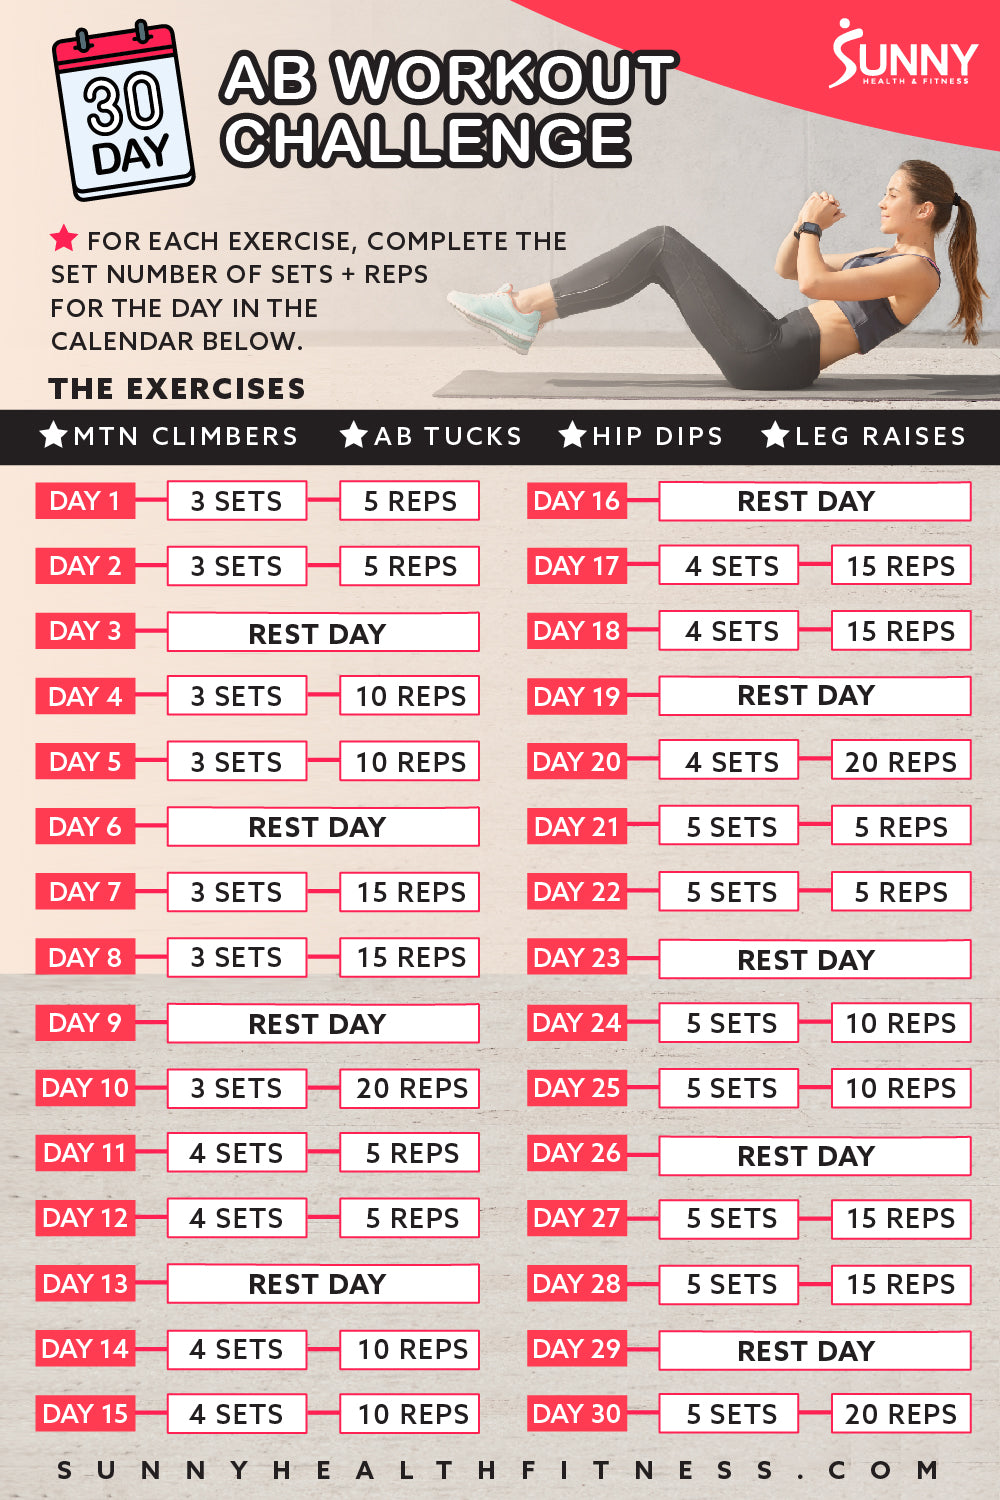 This 10-Minute No-Equipment Core Workout Will Leave Your Abs Burning, 30  Effective, Sore-the-Next-Day Ab Workout Videos